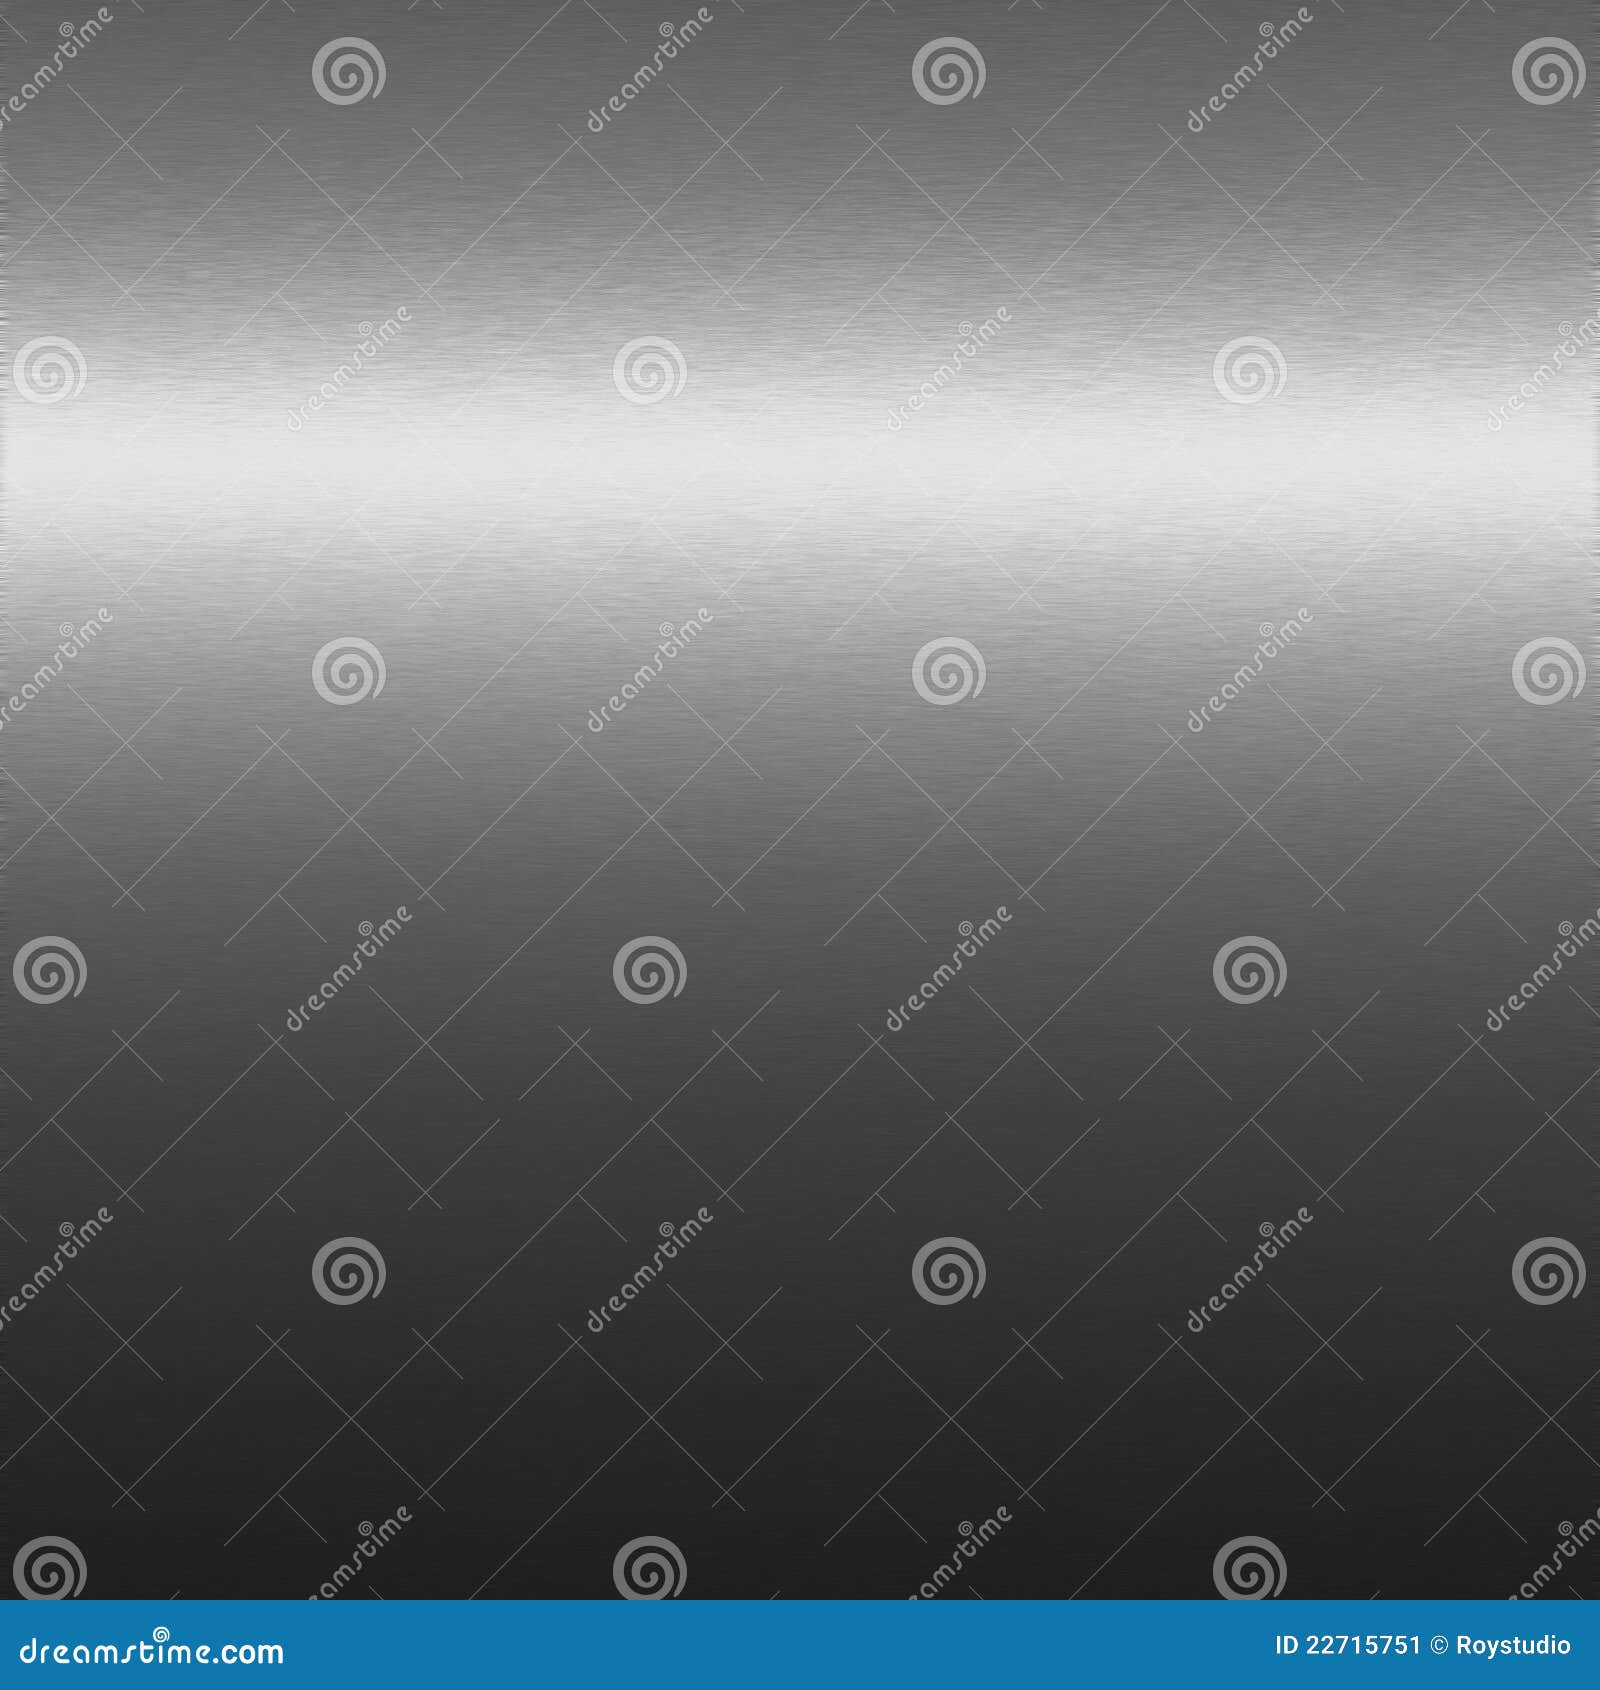 silver chrome texture, background to 